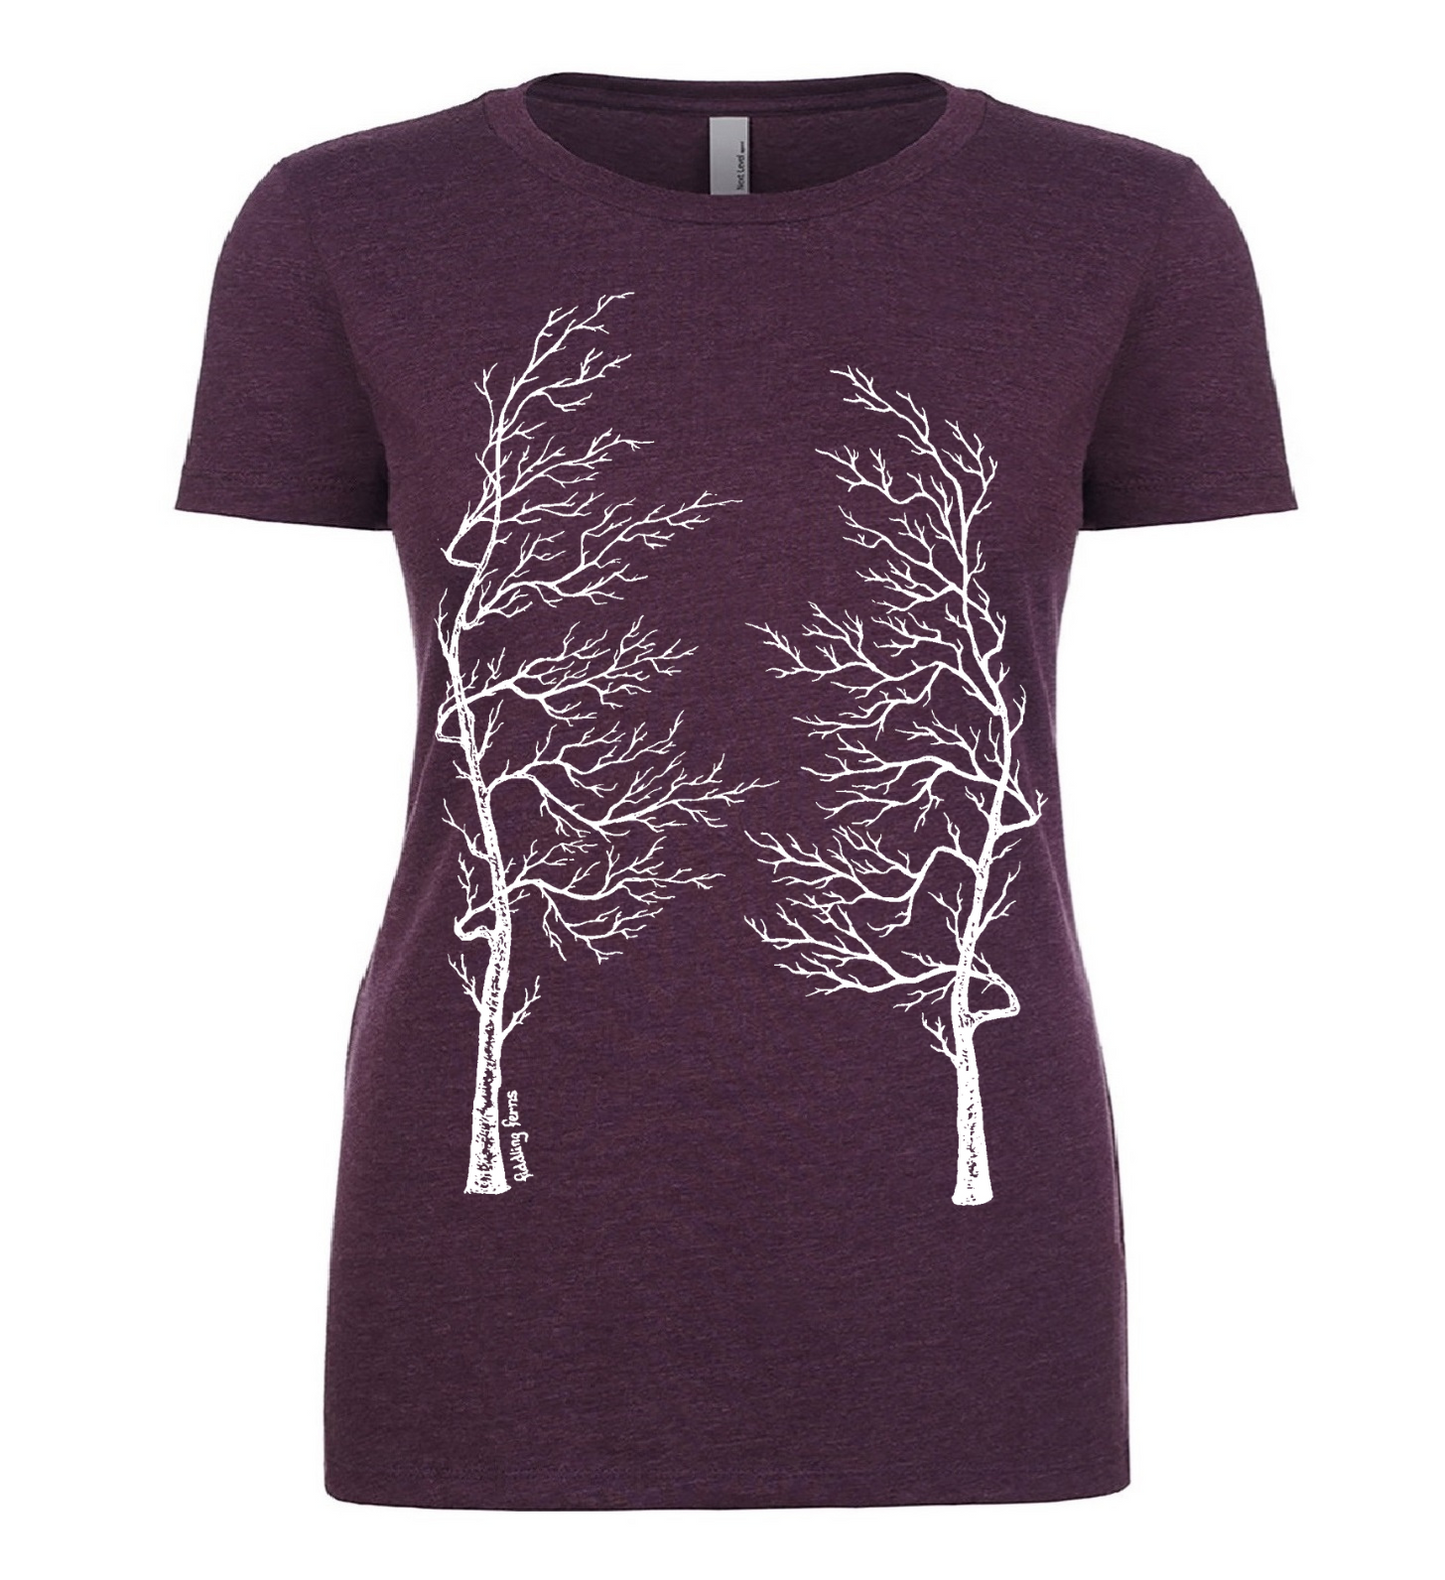 Bare Trees as Lungs Ladies T Shirt